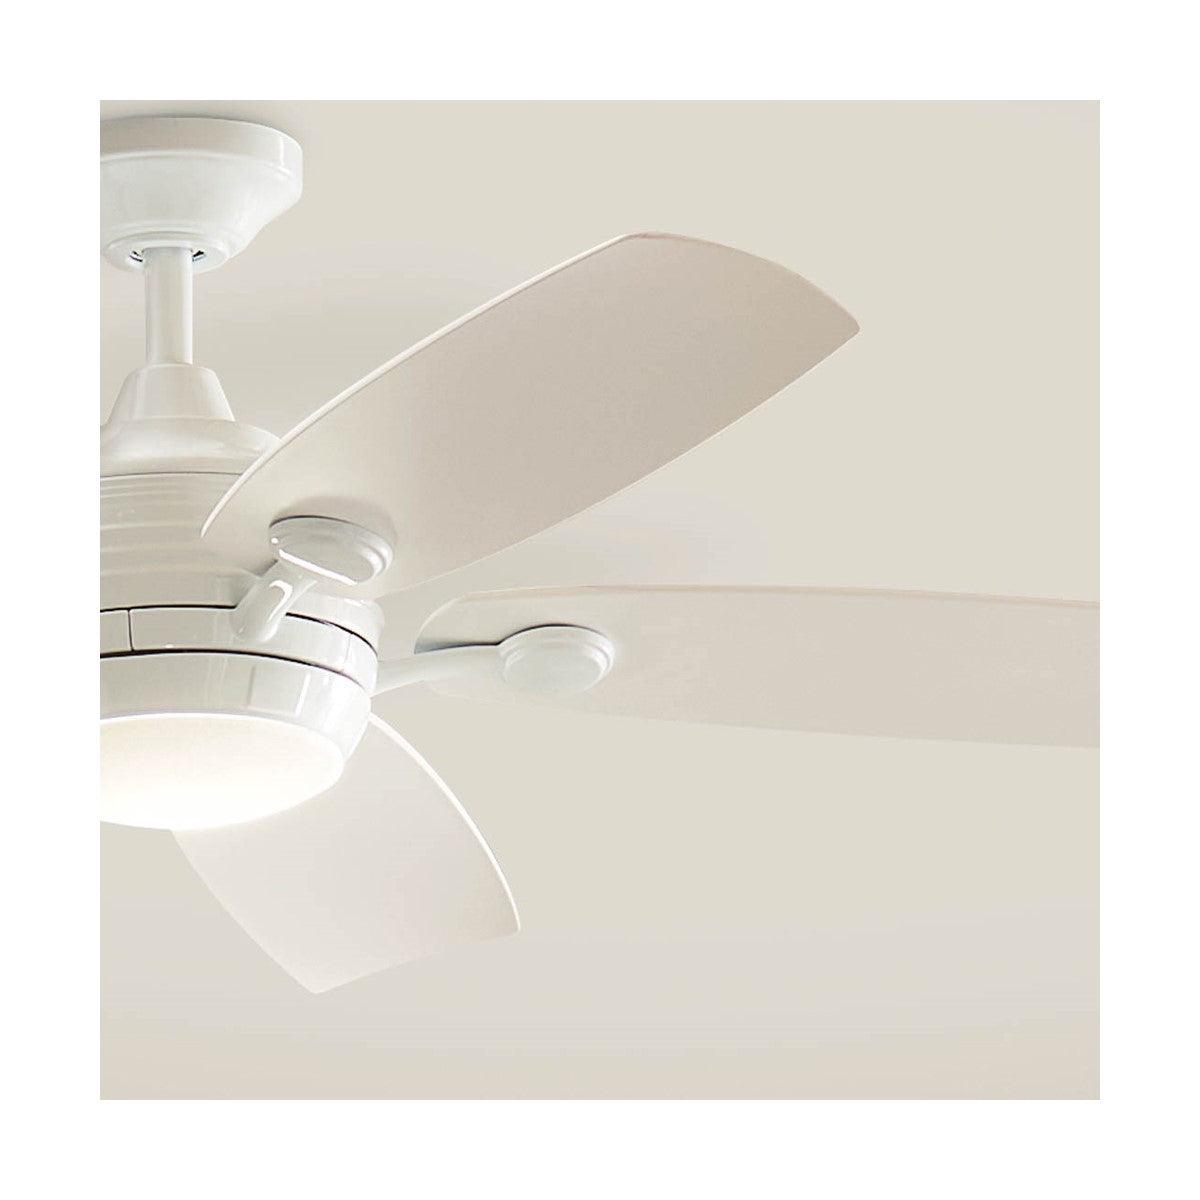 Tranquil 56 Inch Indoor/Outdoor Ceiling Fan With Light And Remote